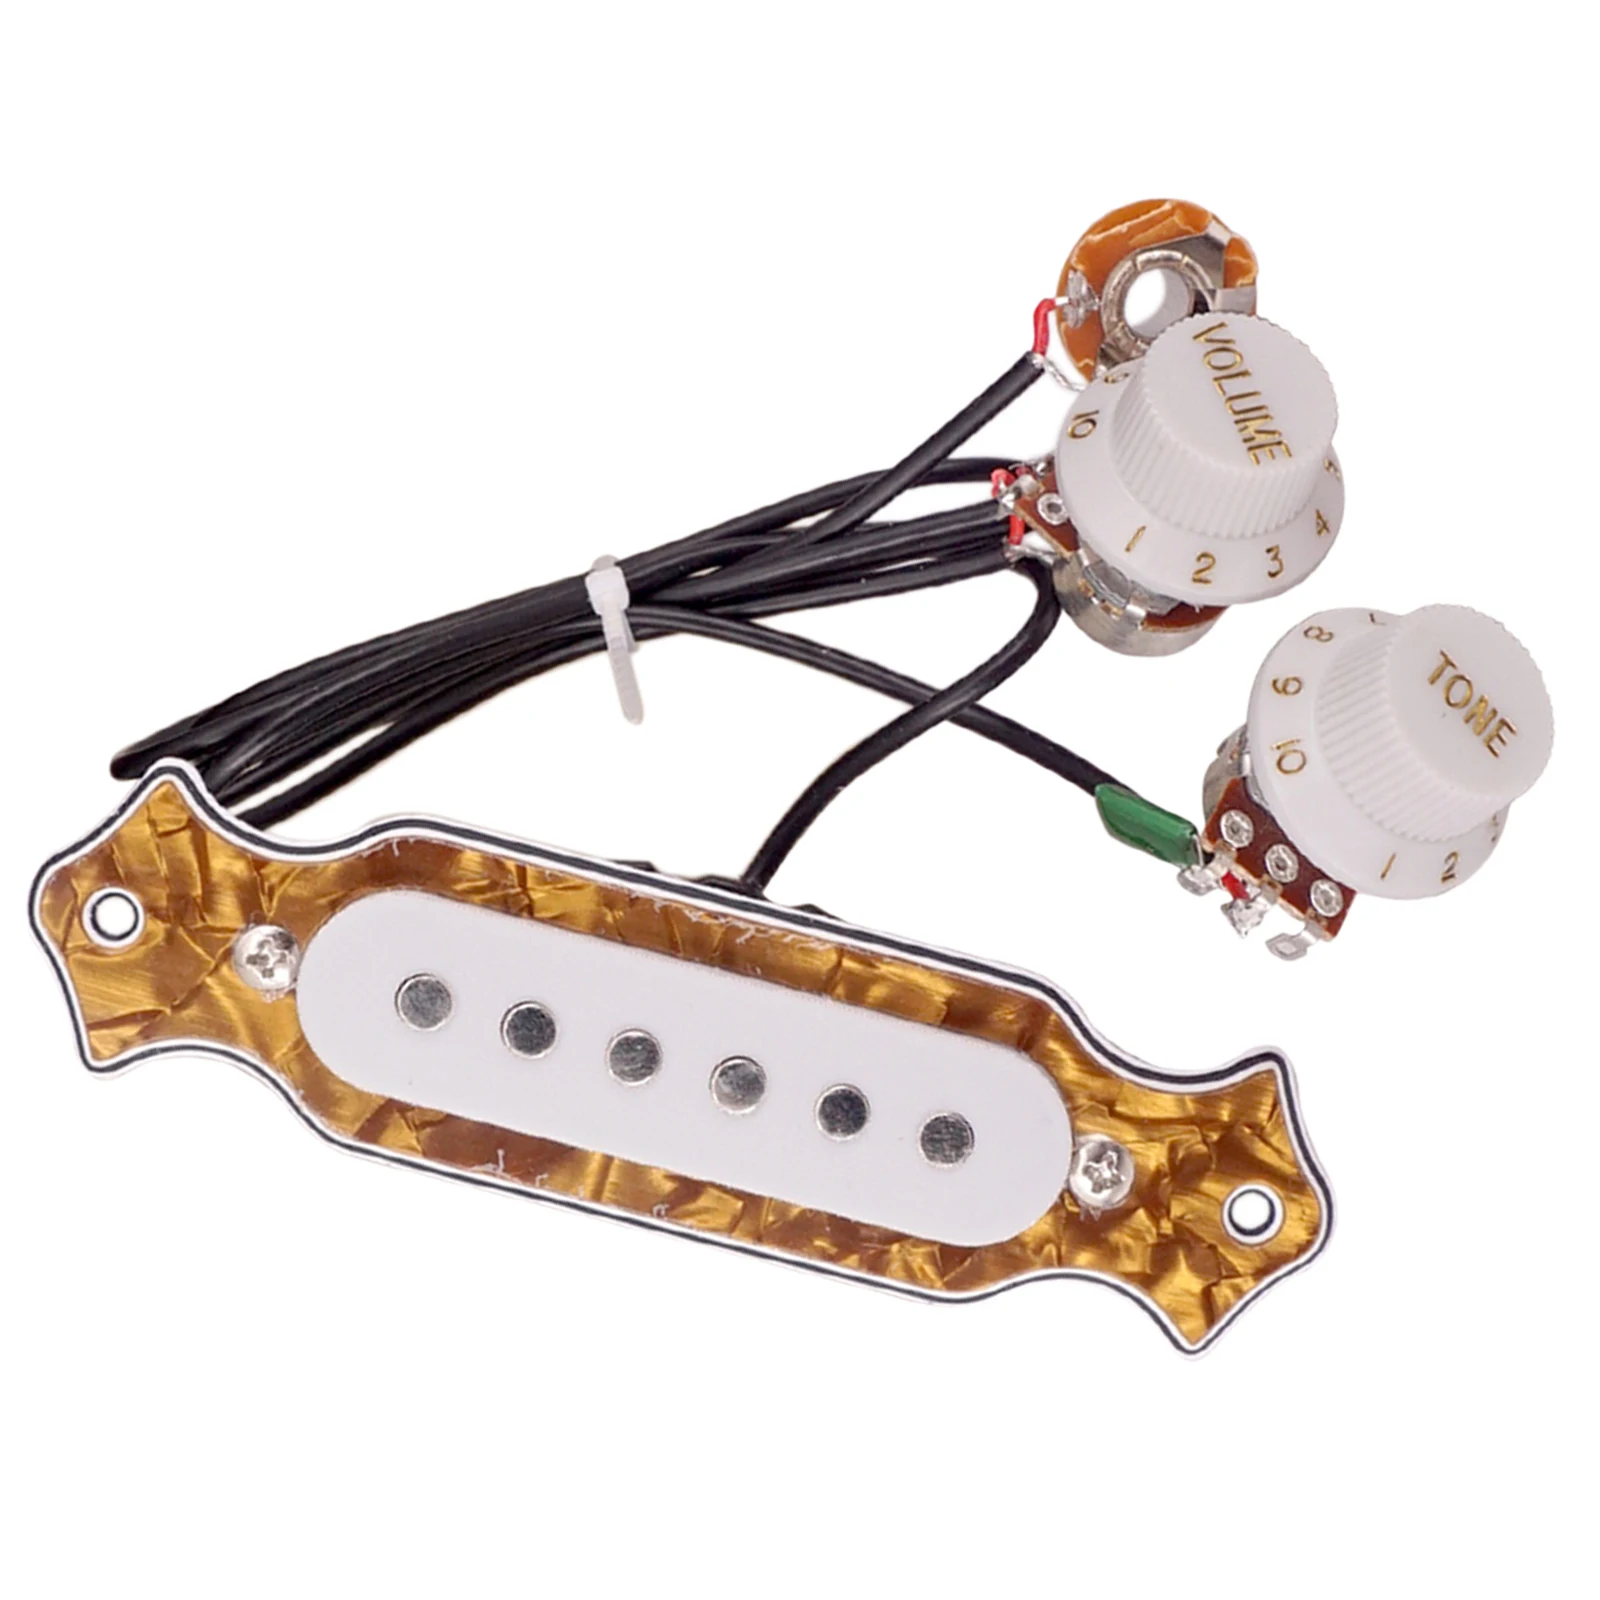 Soundhole Prewired Active Pickup 6 String for Cigar Box Guitar Parts Accessories